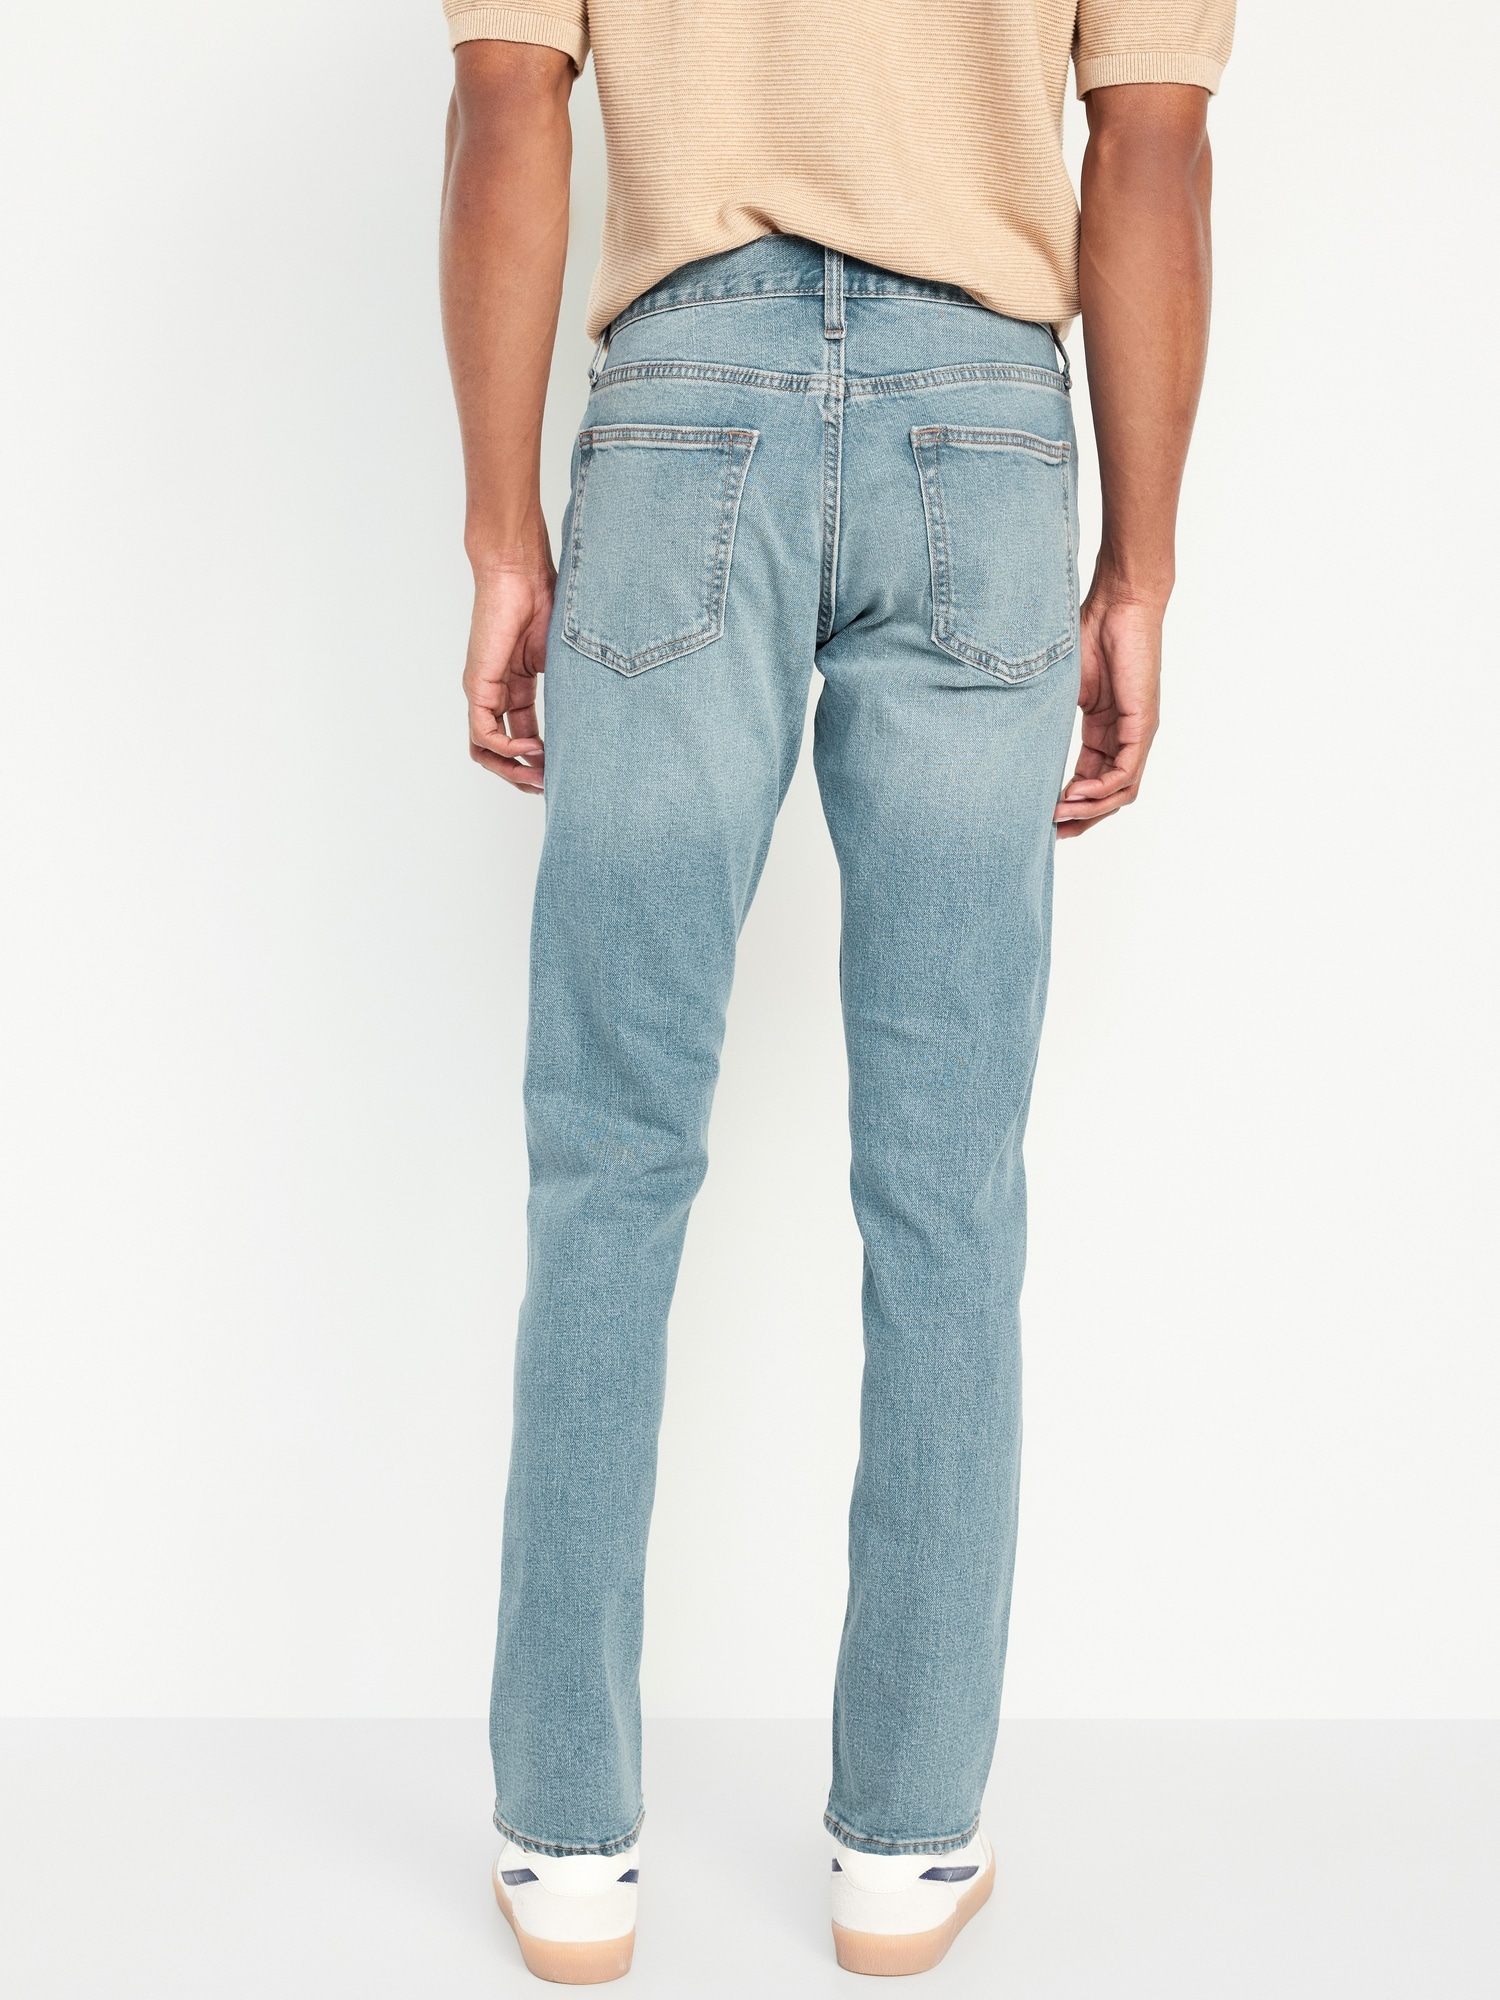 Old Navy Men's Relaxed Slim Taper Built-in Flex Jeans - - Size 44W